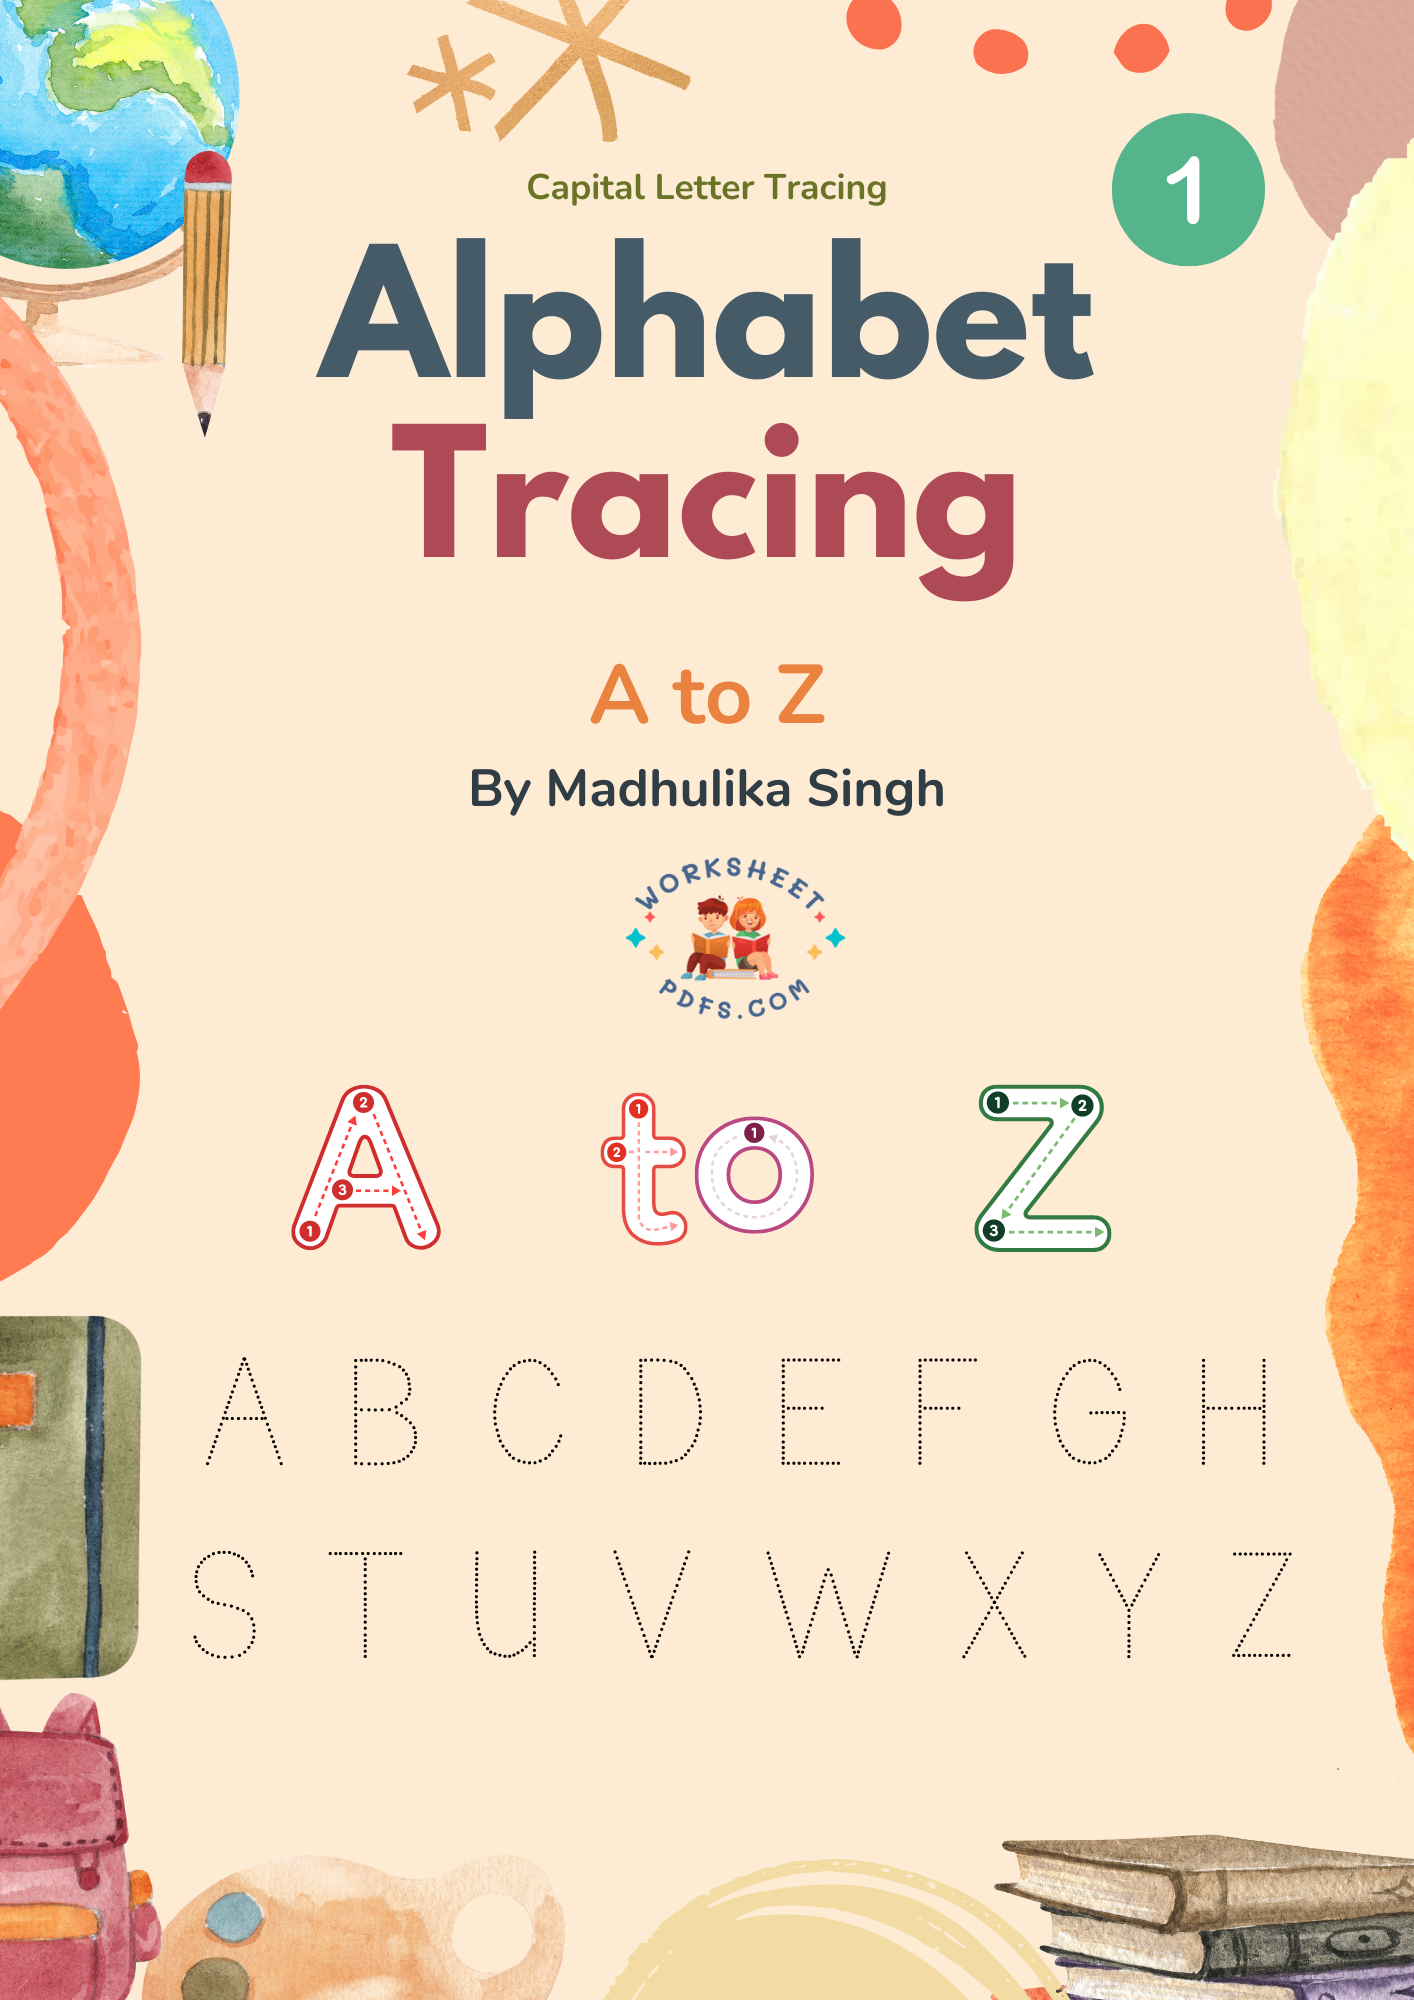 A to Z Capital Letter Tracing